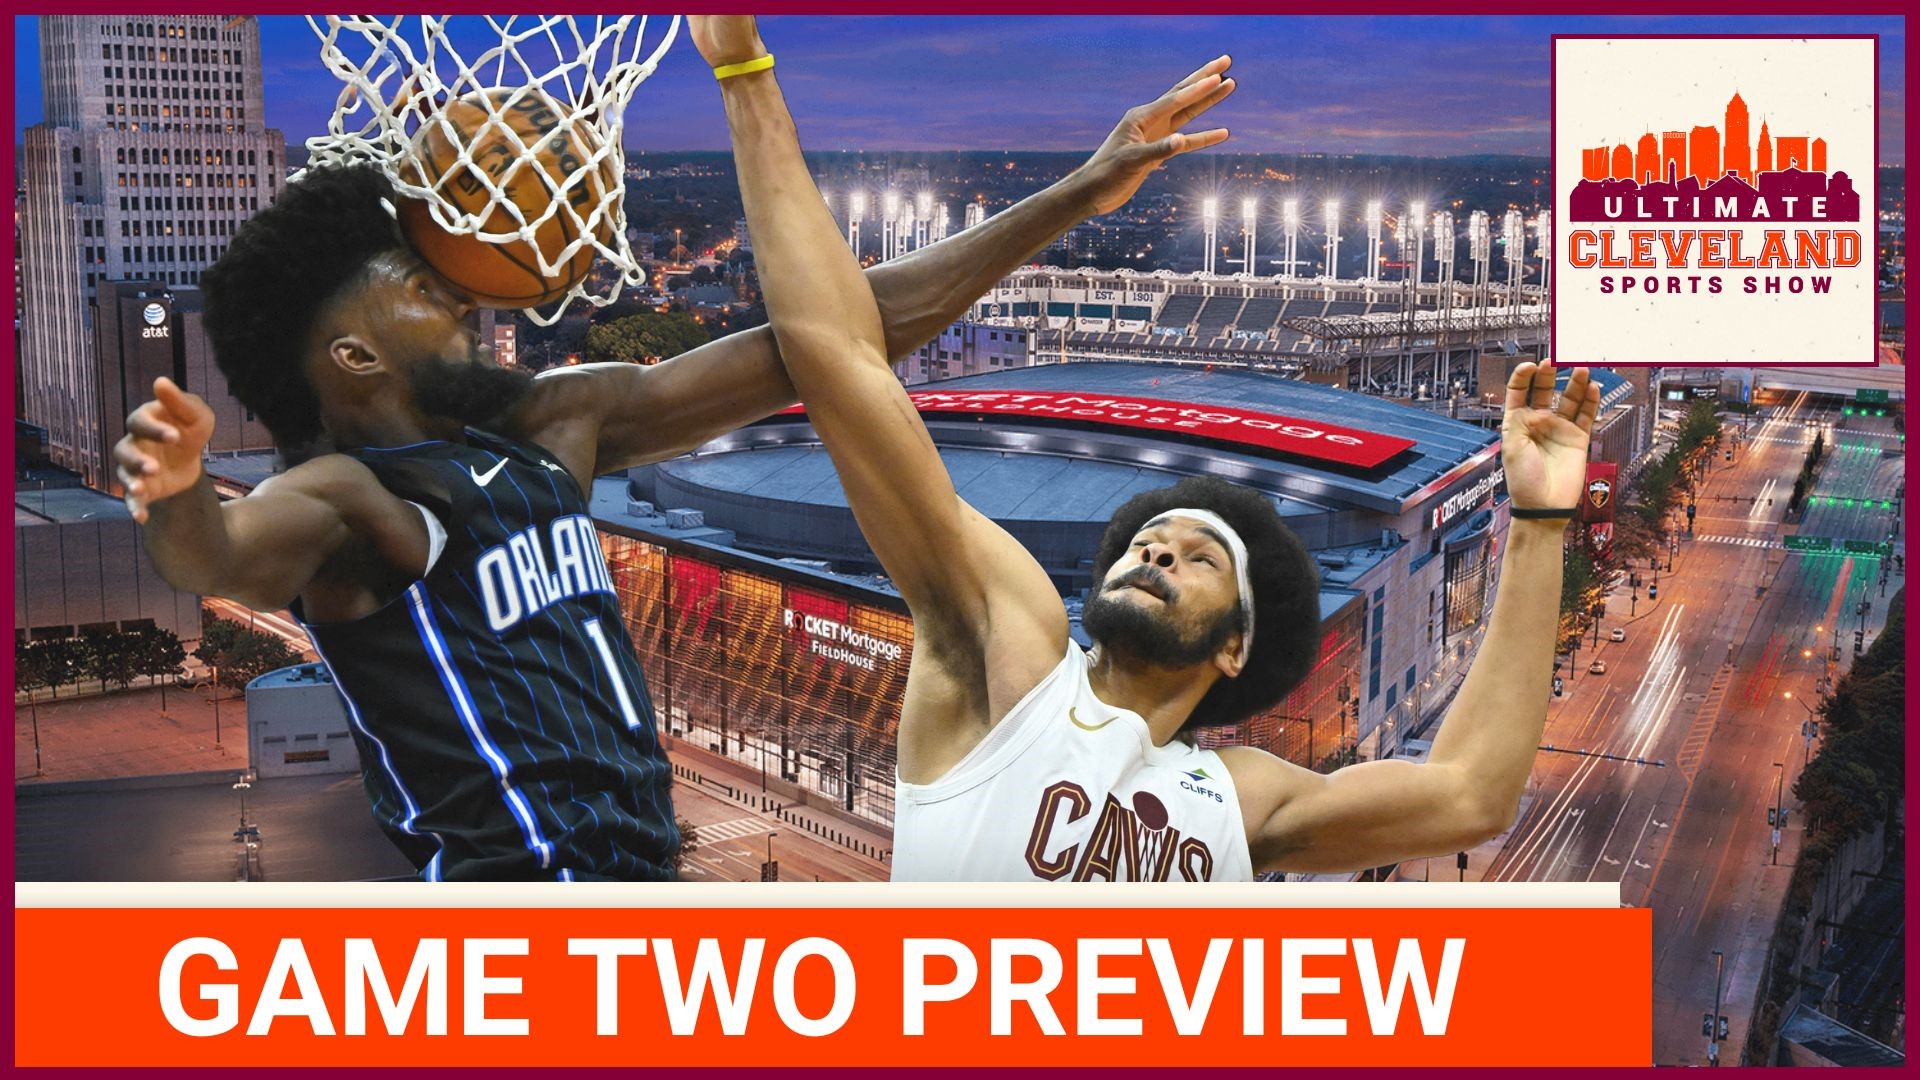 What will the Cleveland Cavaliers and Orland Magic change going into game two tonight?